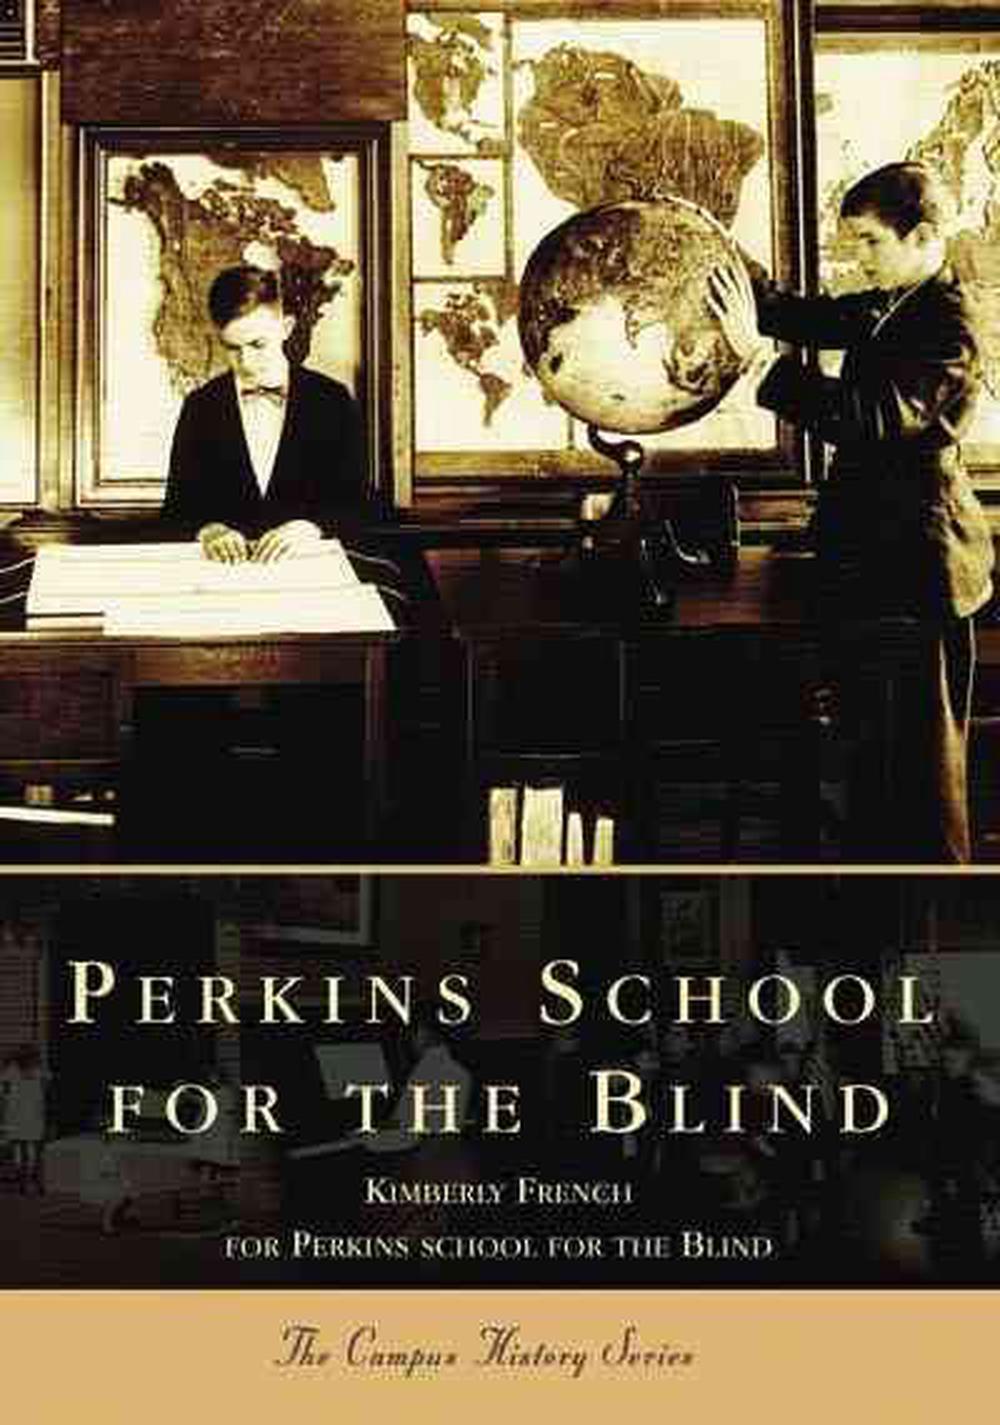 Perkins School for the Blind by Kimberly French (English) Paperback